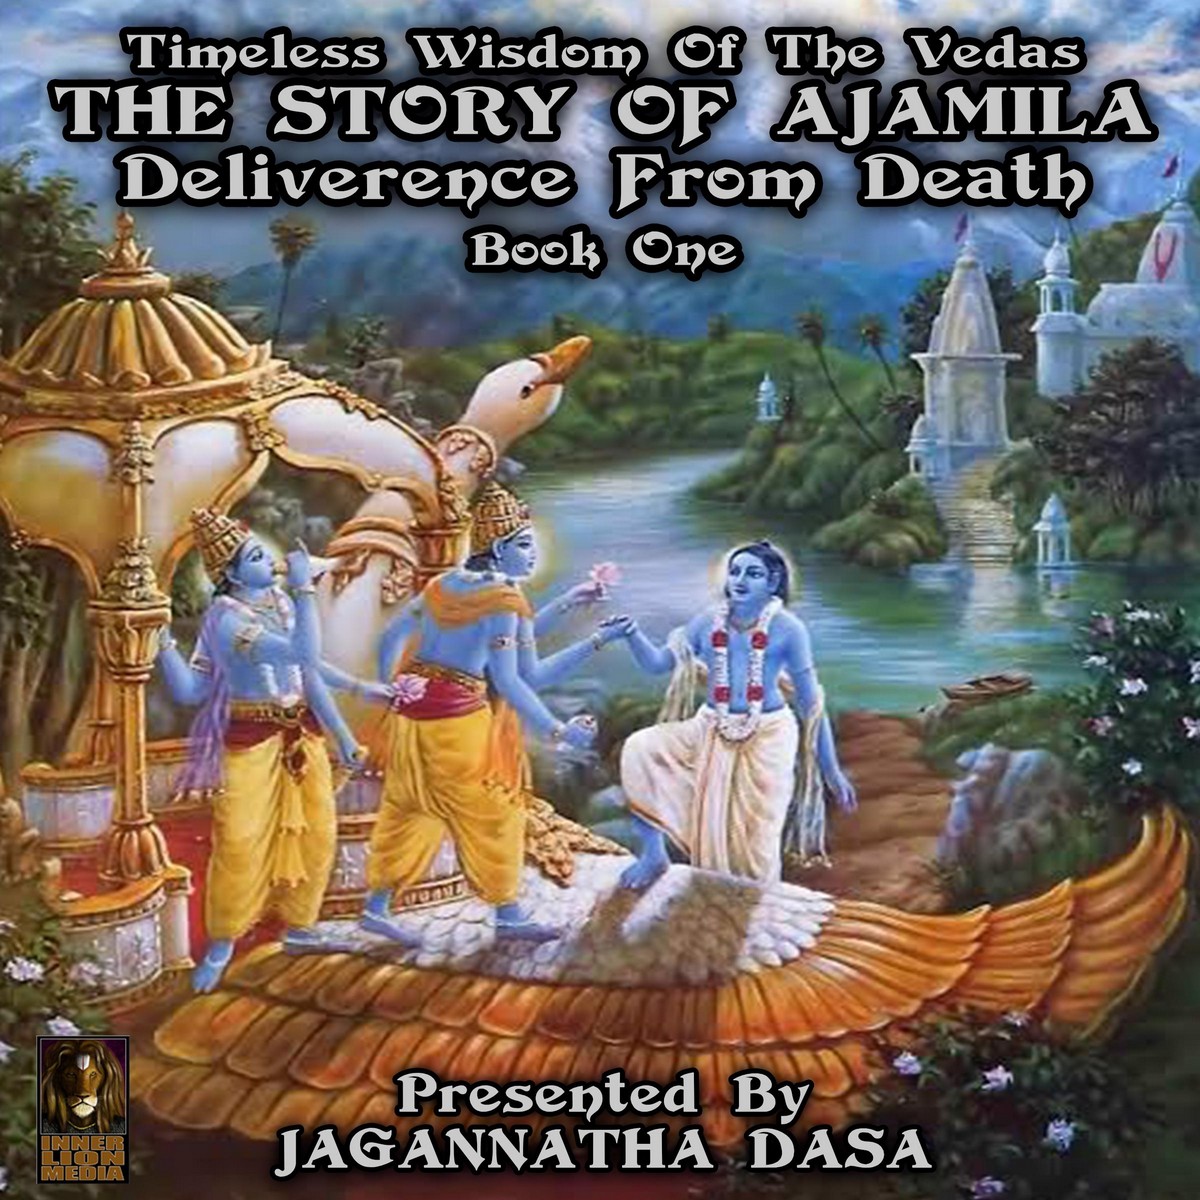 Timeless Wisdom Of The Vedas The Story Of Ajamila Deliverence From Death – Book One